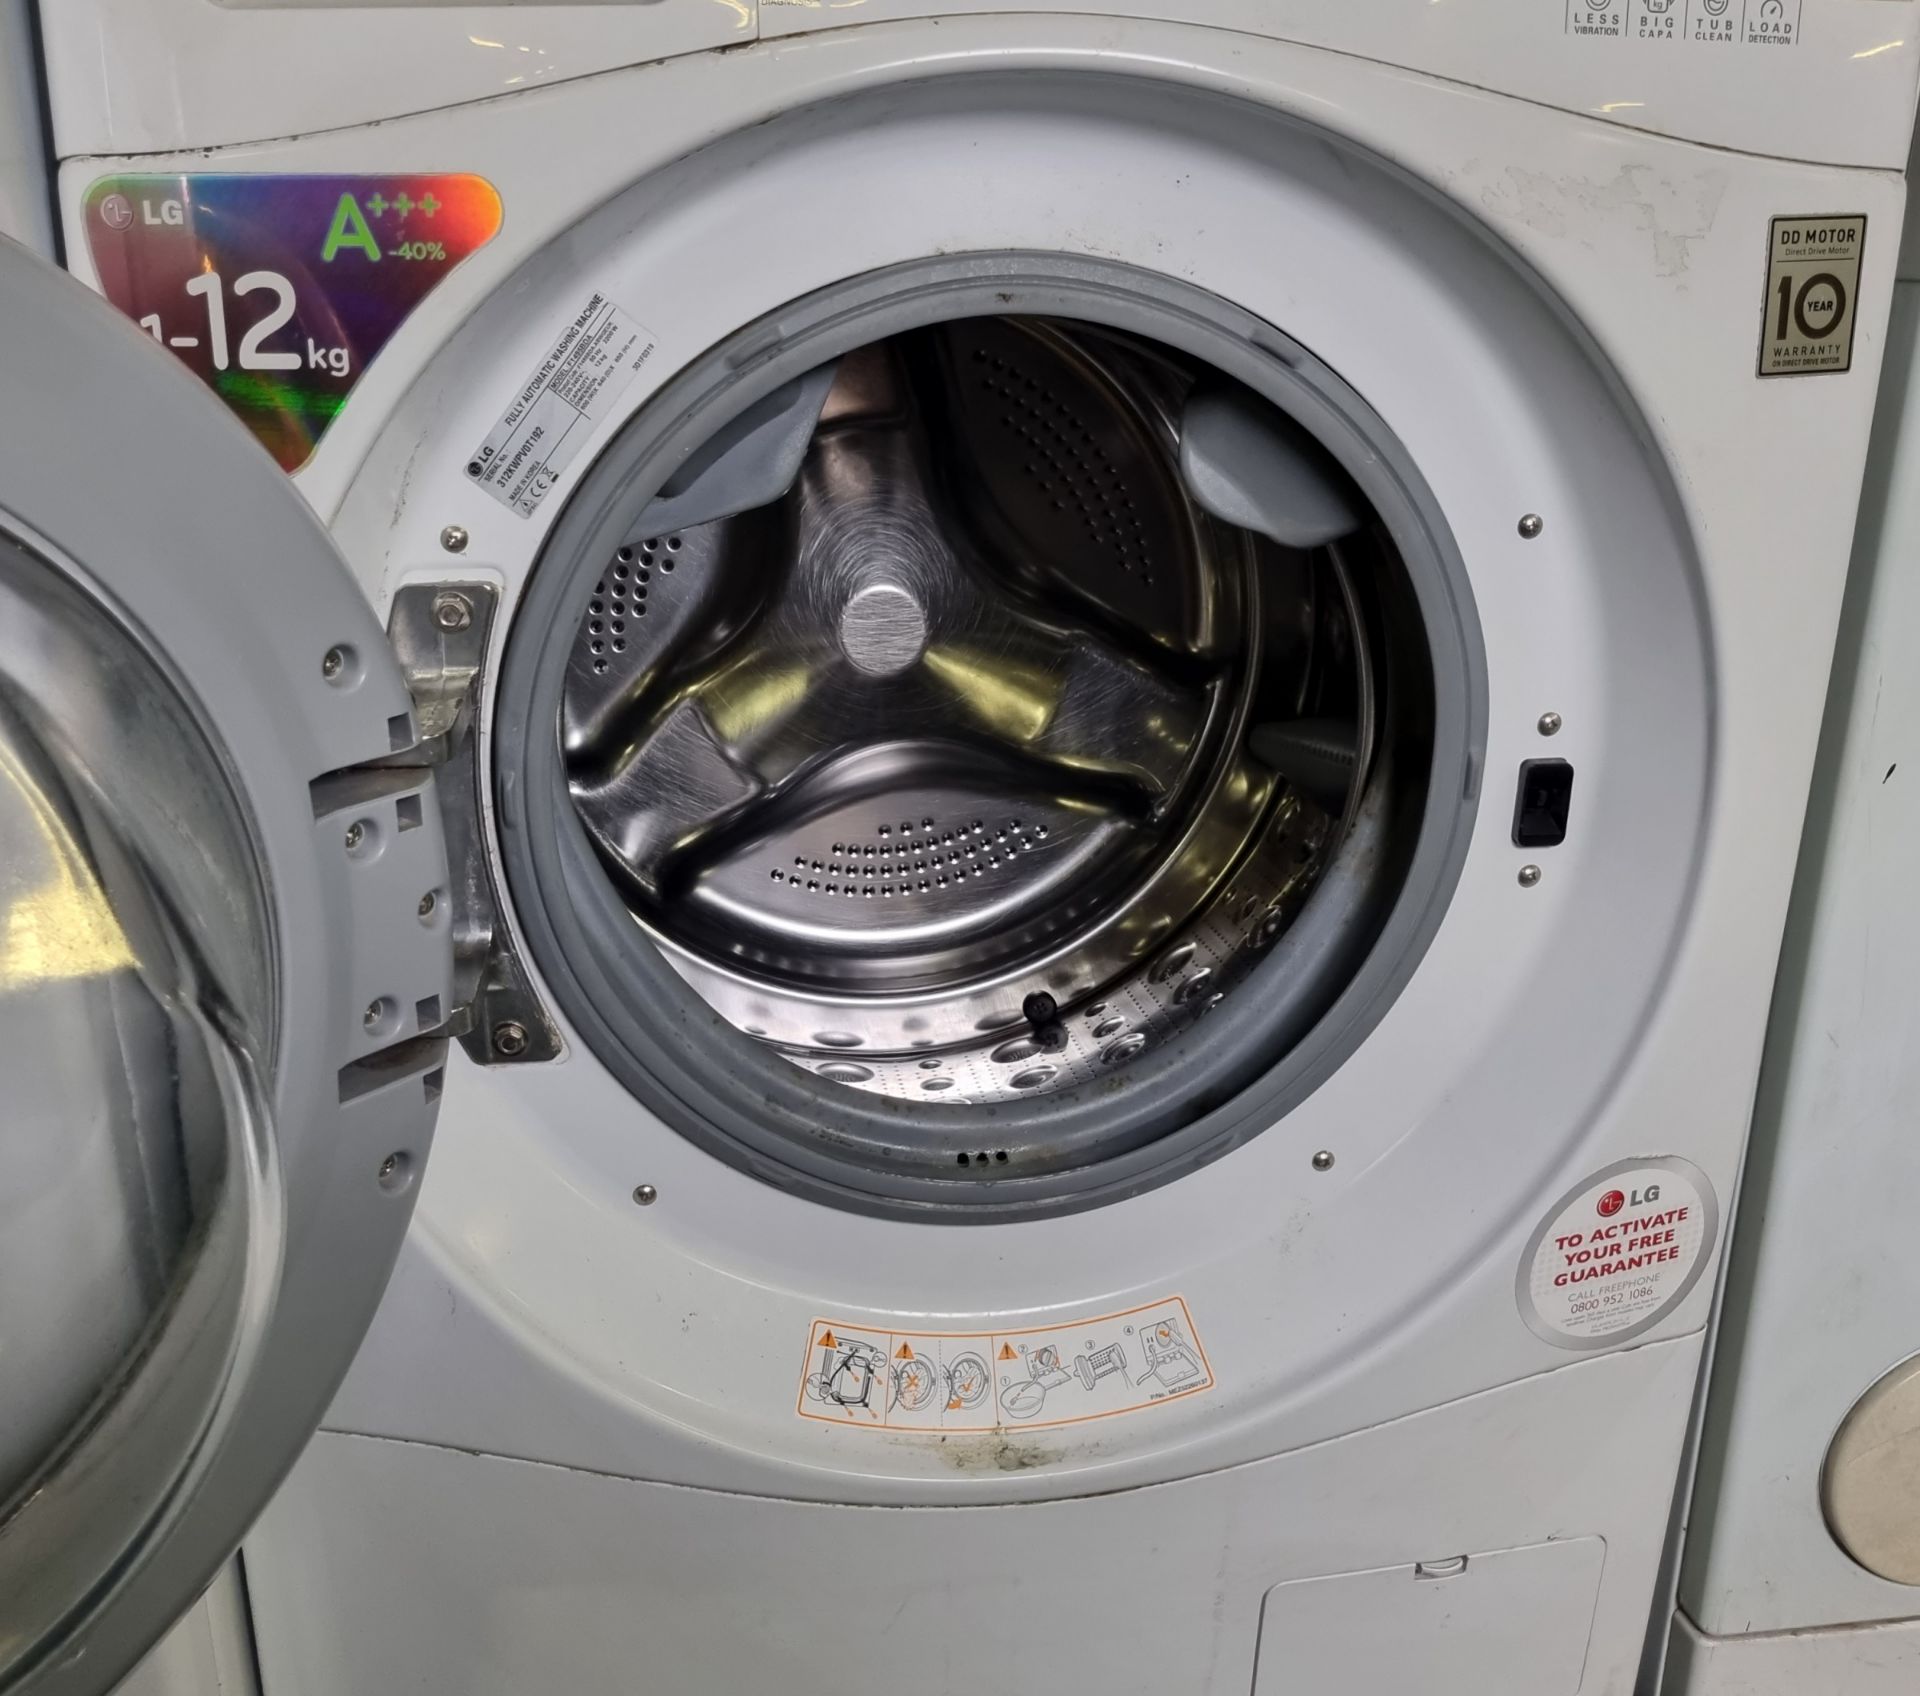 LG Truesteam 12kg direct drive washing machine - L 600 x W 600 x H 850mm - SOME COSMETIC DAMAGE - Image 4 of 5